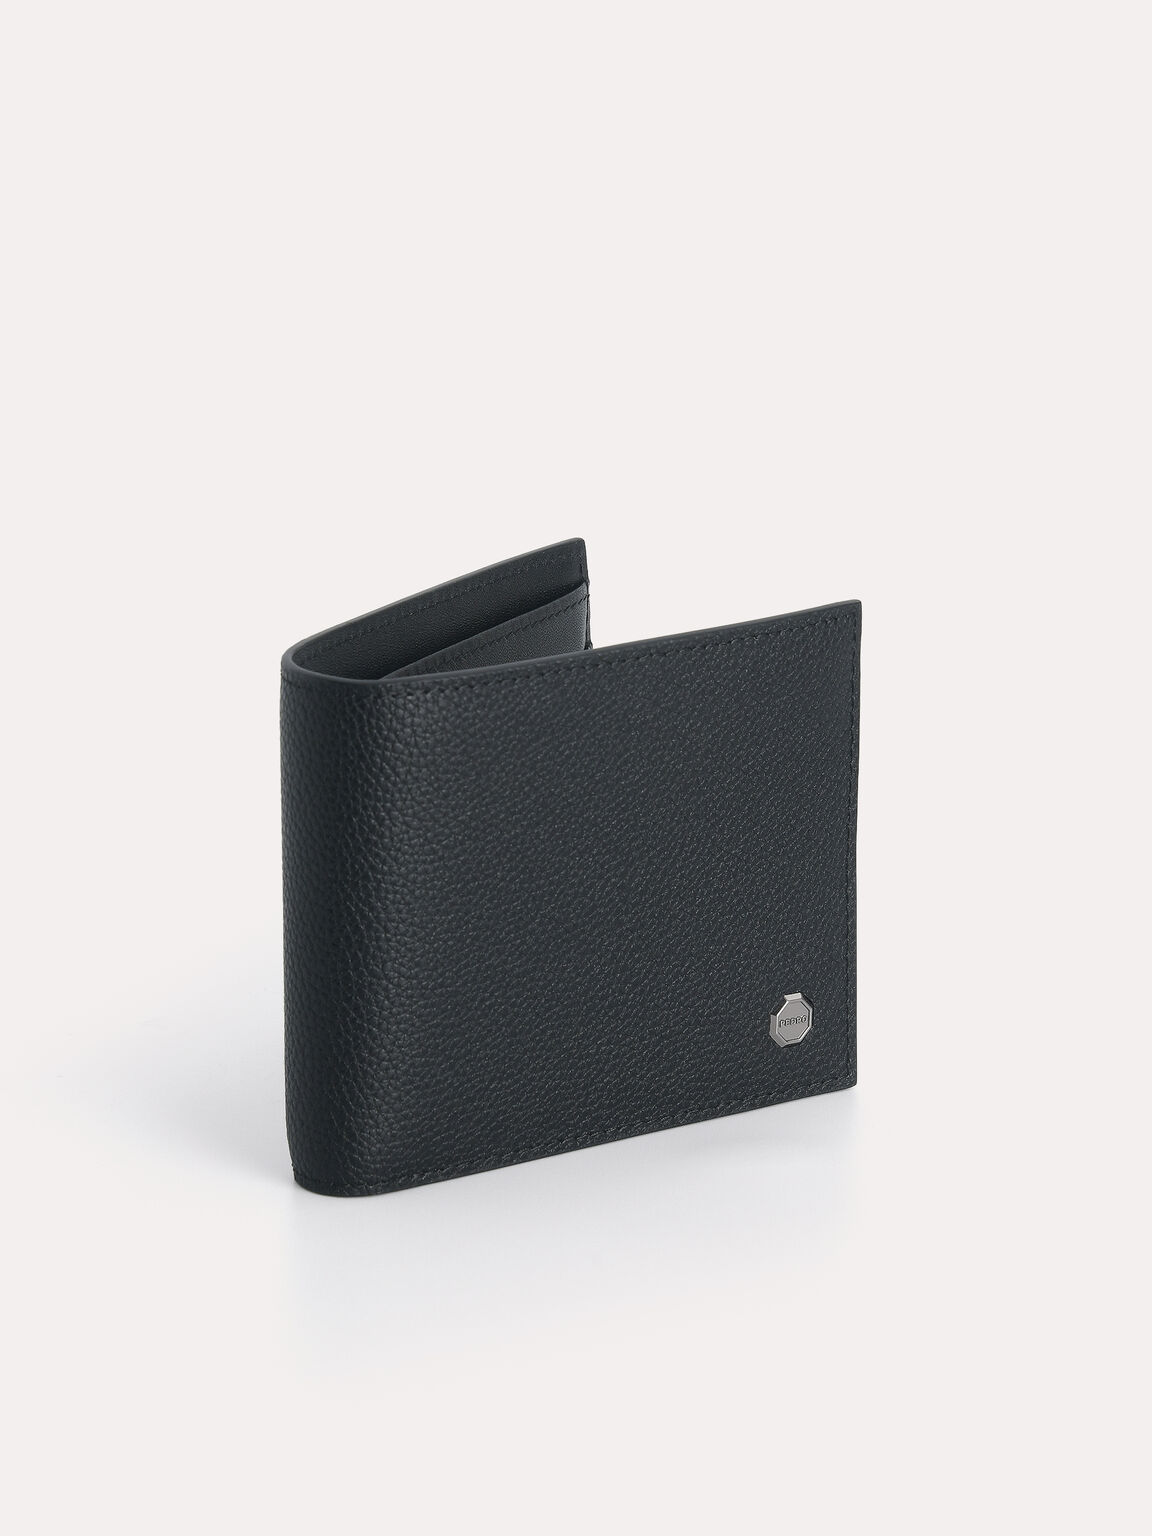 Textured Leather Bi-Fold Wallet with Insert, Black, hi-res